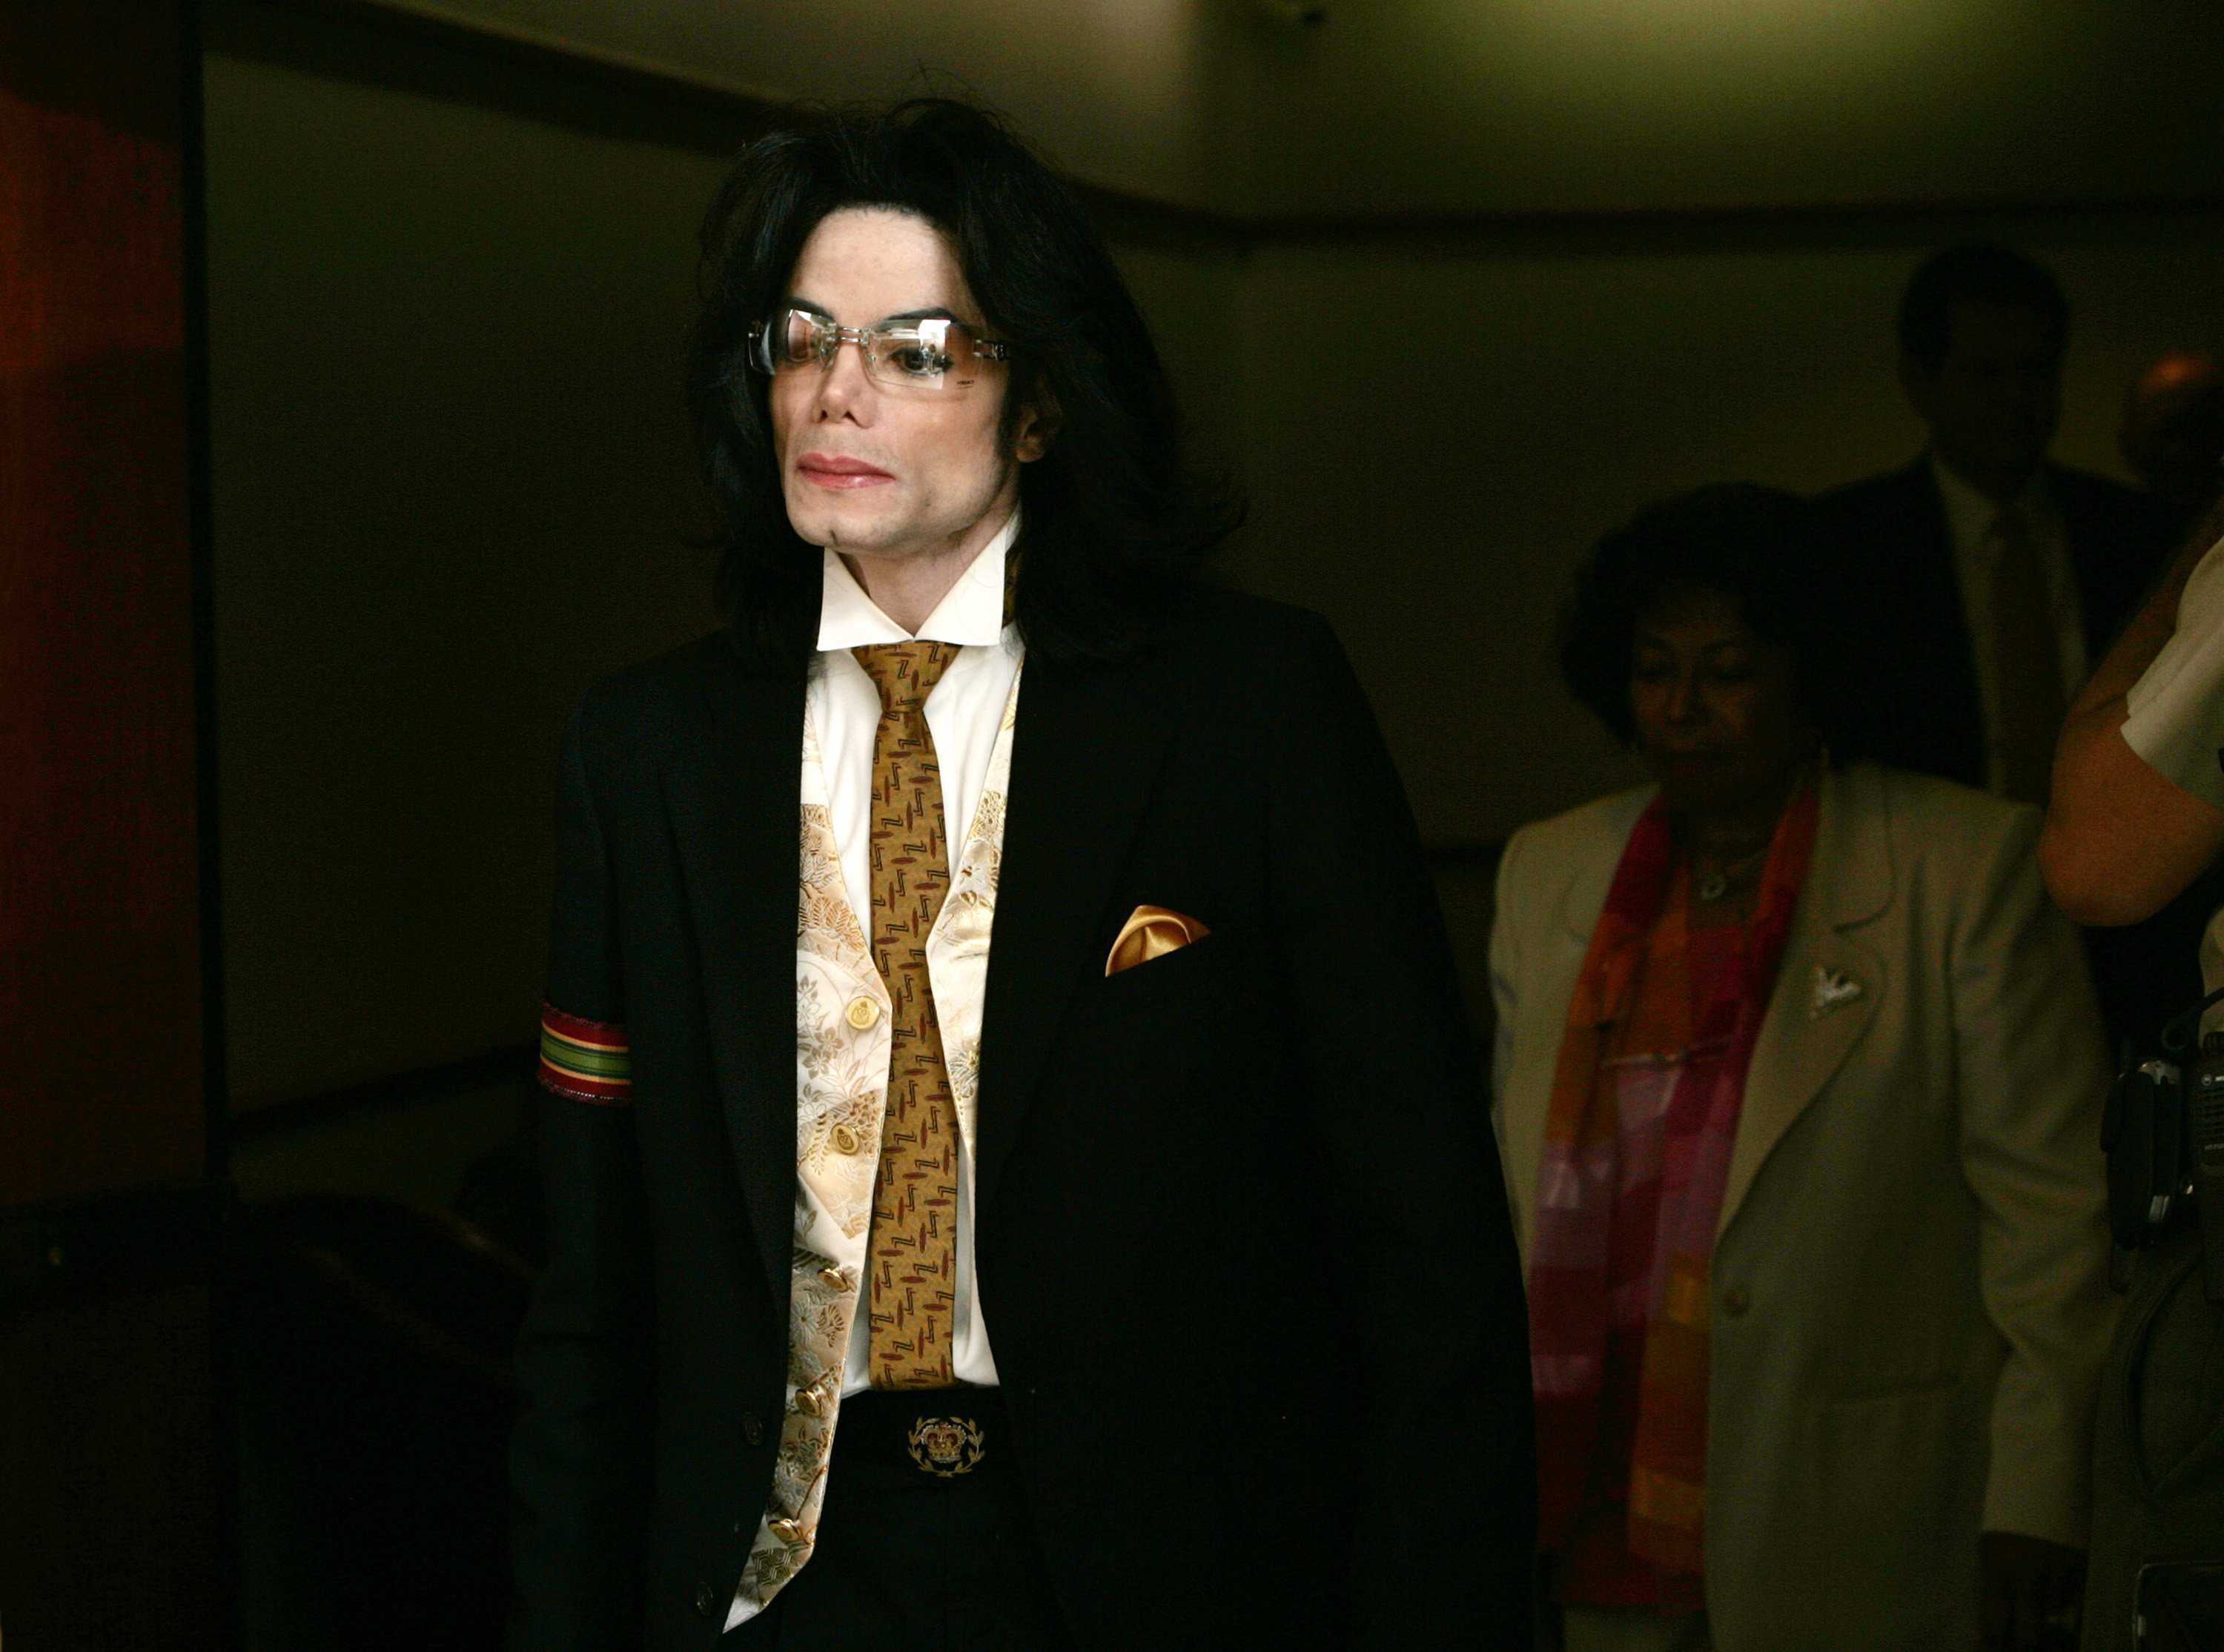 Michael Jackson leaving the courtroom of Santa Barbara County Courthouse on June 3, 2005 during the second day of closing arguments for his child molestation trial. | Photo: Getty